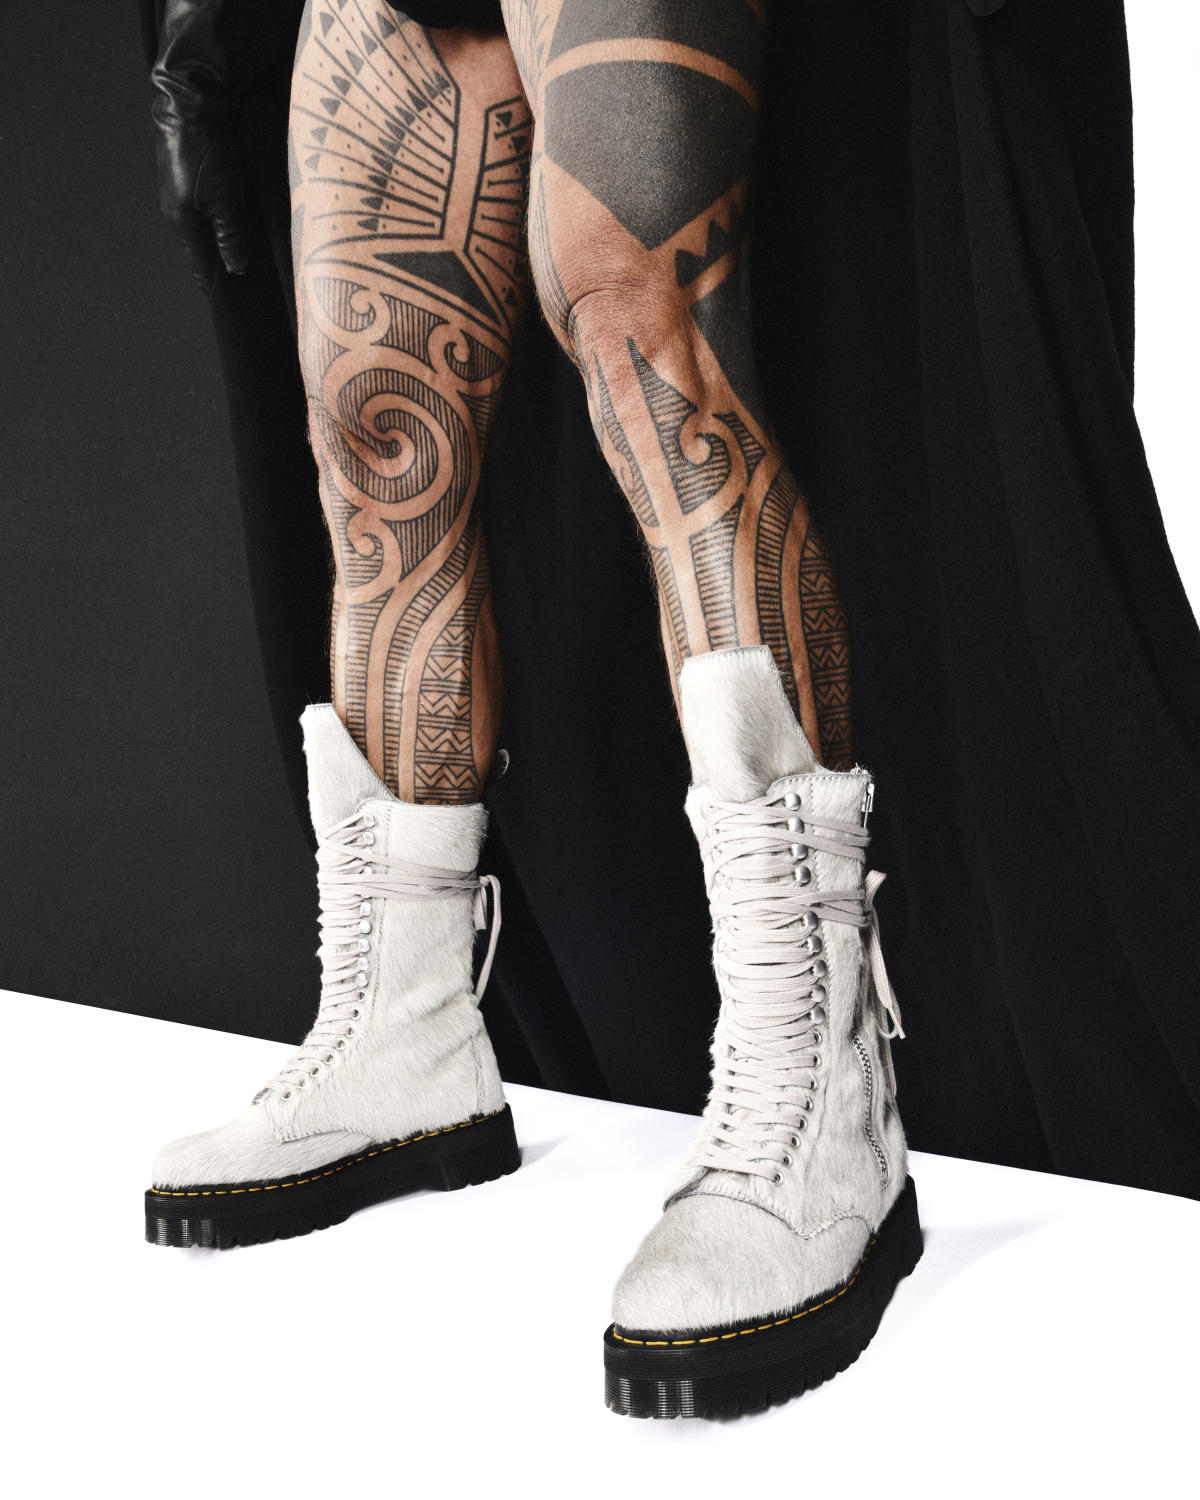 EXCLUSIVE: Rick Owens Gives ‘Underground Aesthetic’ to Dr. Martens